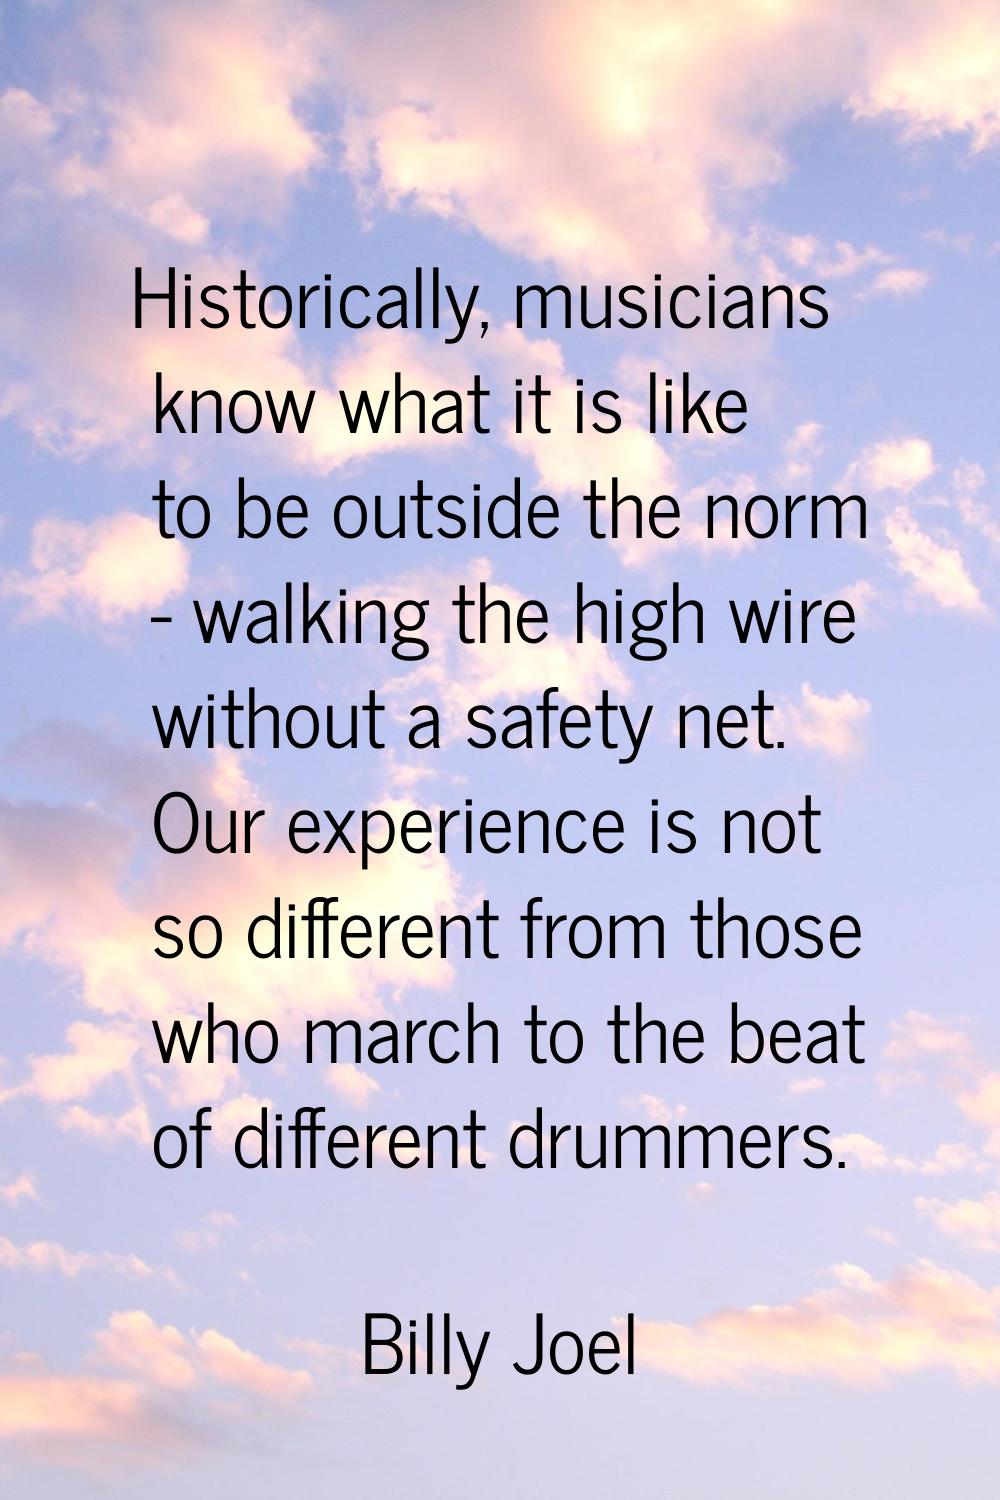 Historically, musicians know what it is like to be outside the norm - walking the high wire without